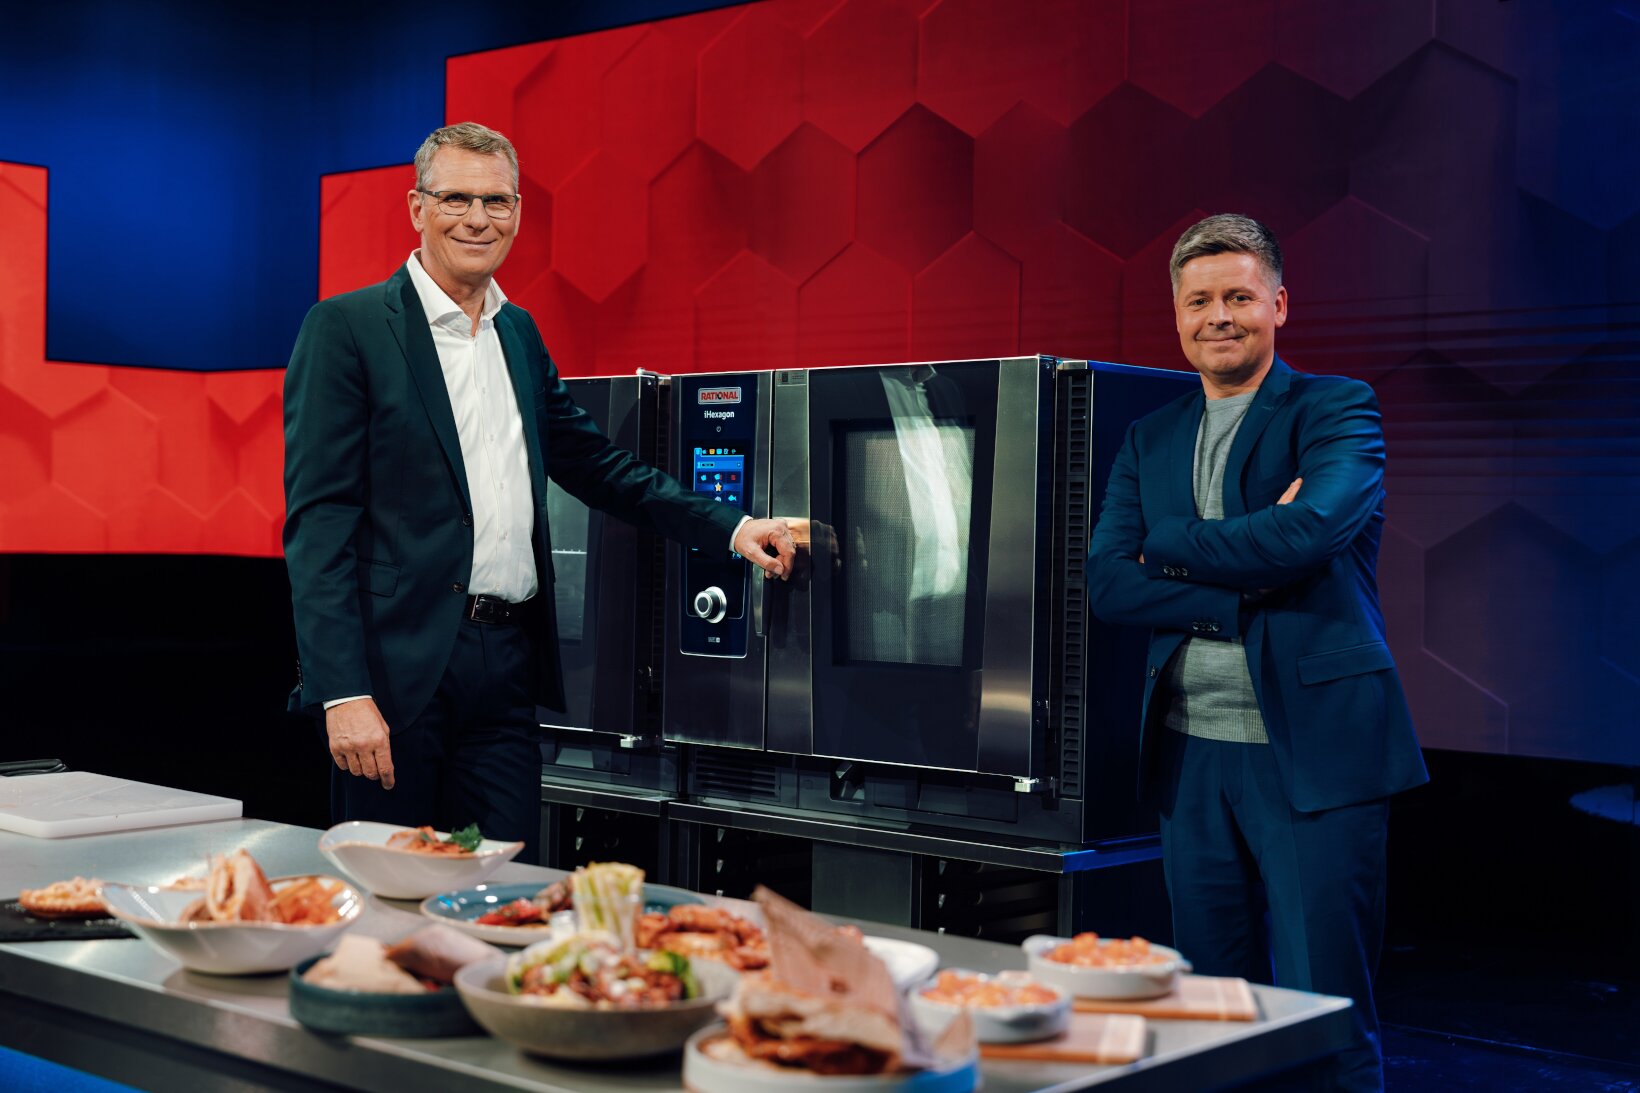 Rational creates new swift cooking equipment category